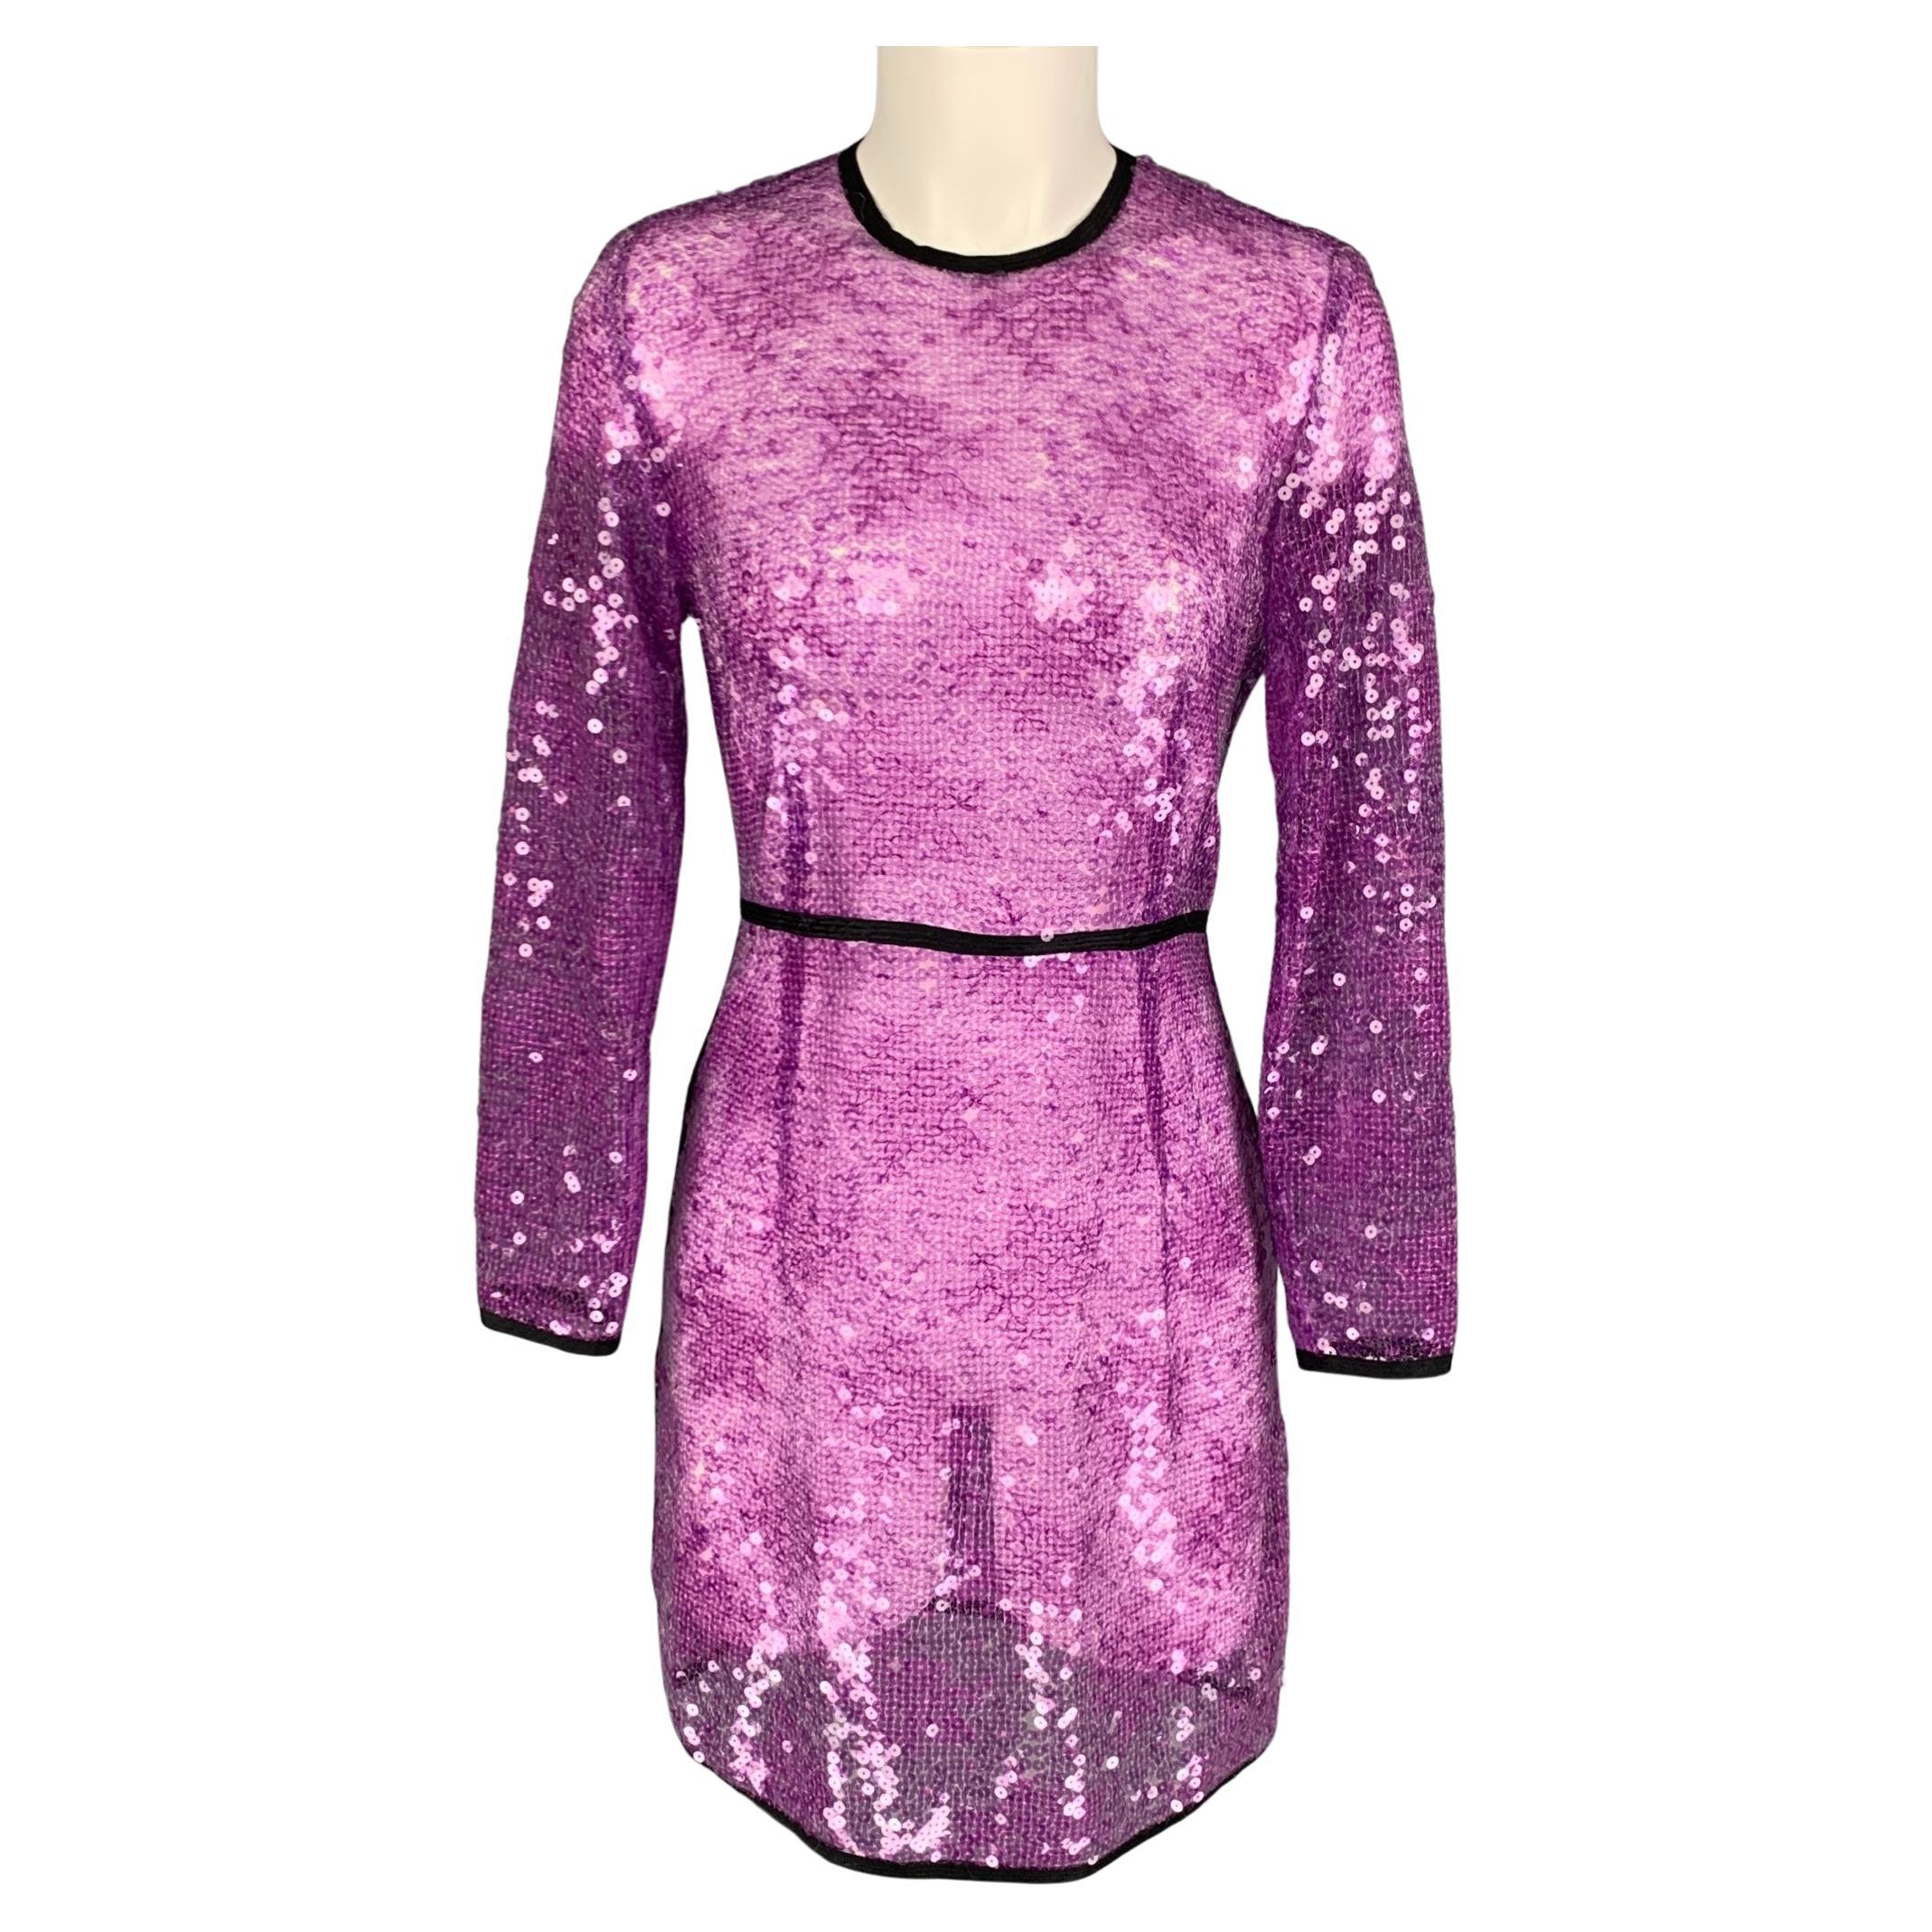 Eye On Design: Pink and Black Sequined Mini Dress By Stephen Sprouse